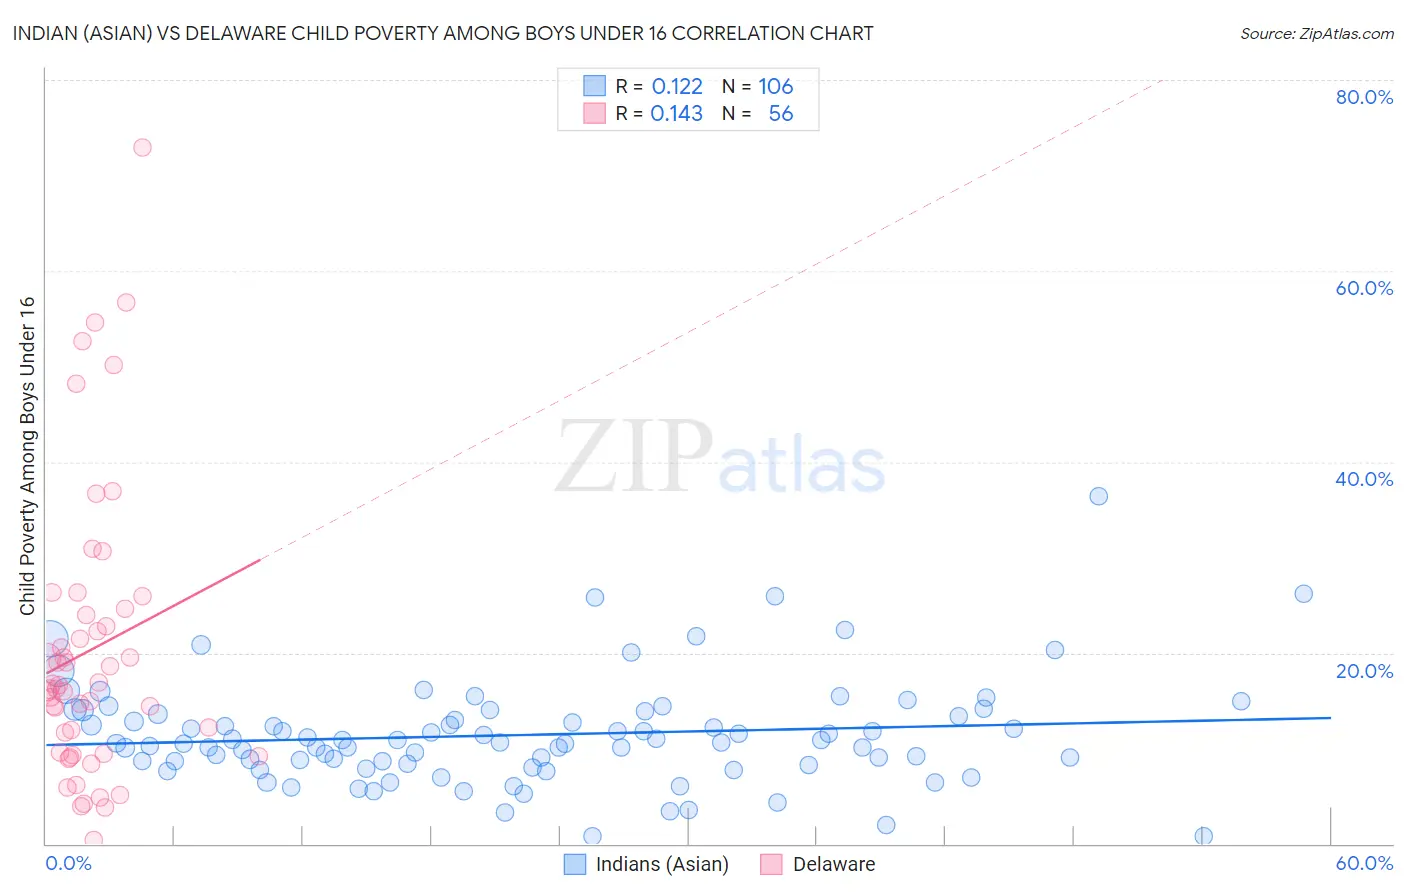 Indian (Asian) vs Delaware Child Poverty Among Boys Under 16